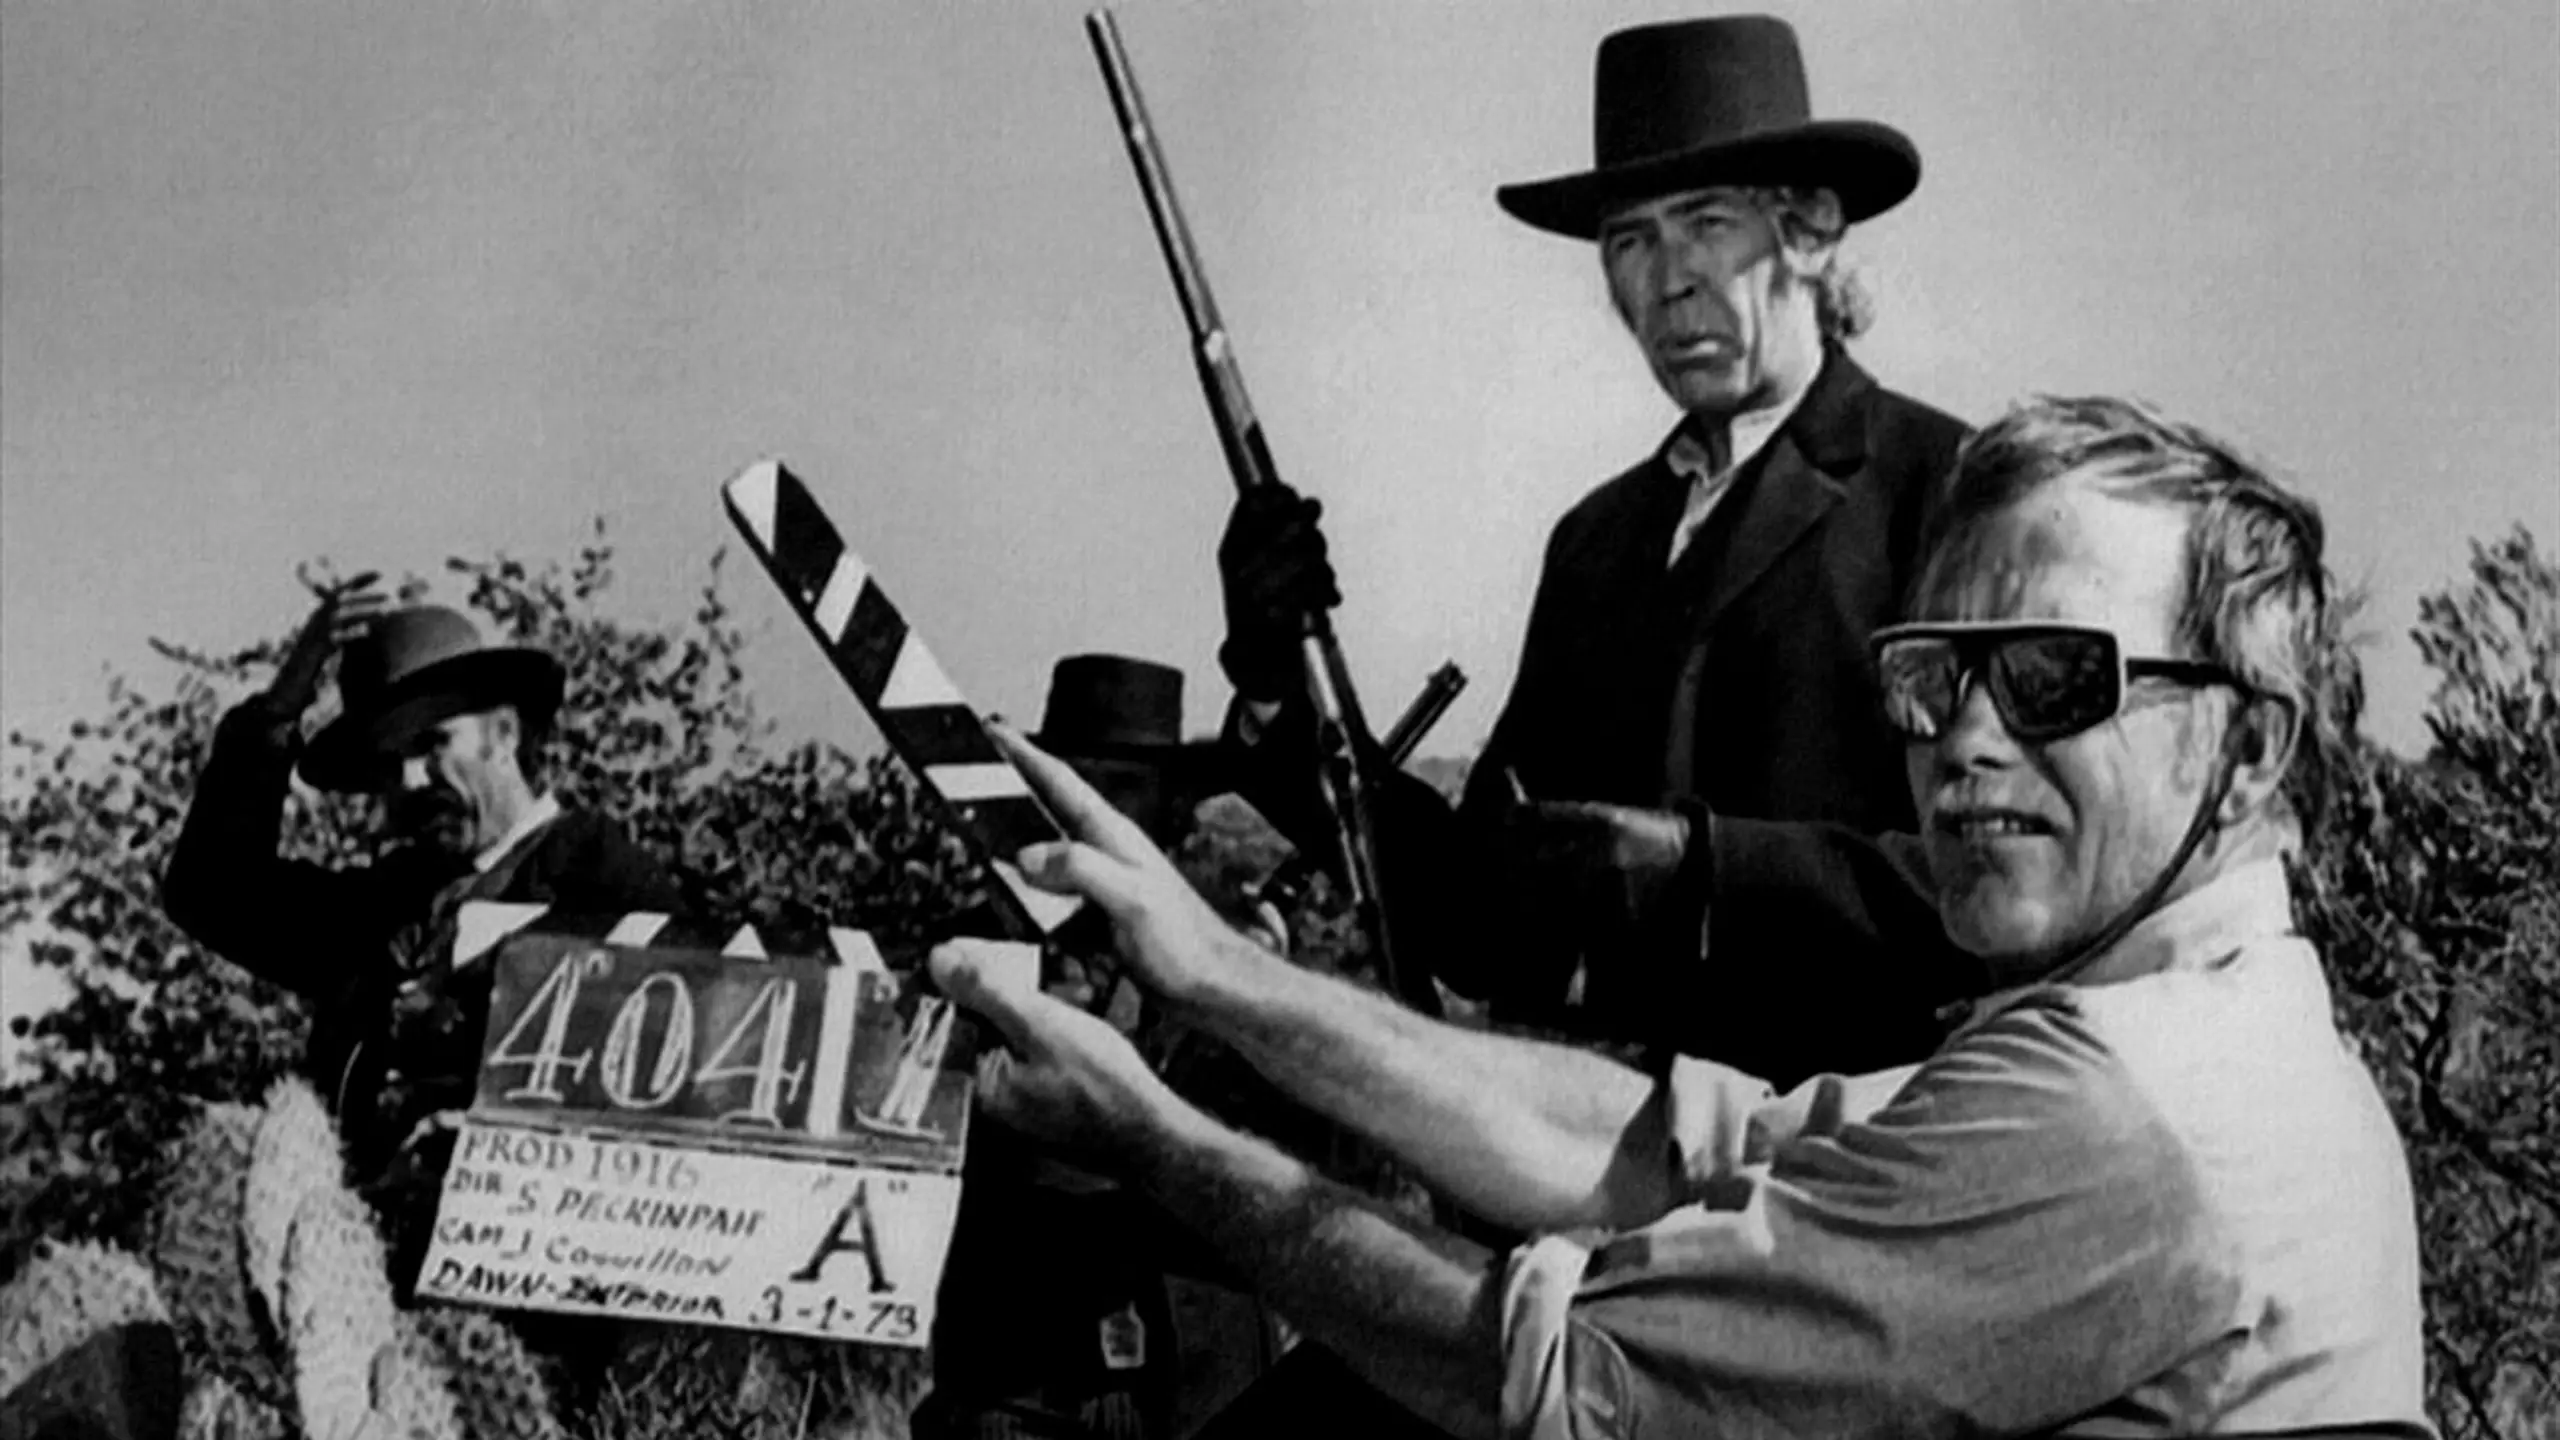 Sam Peckinpah's West: Legacy of a Hollywood Renegade